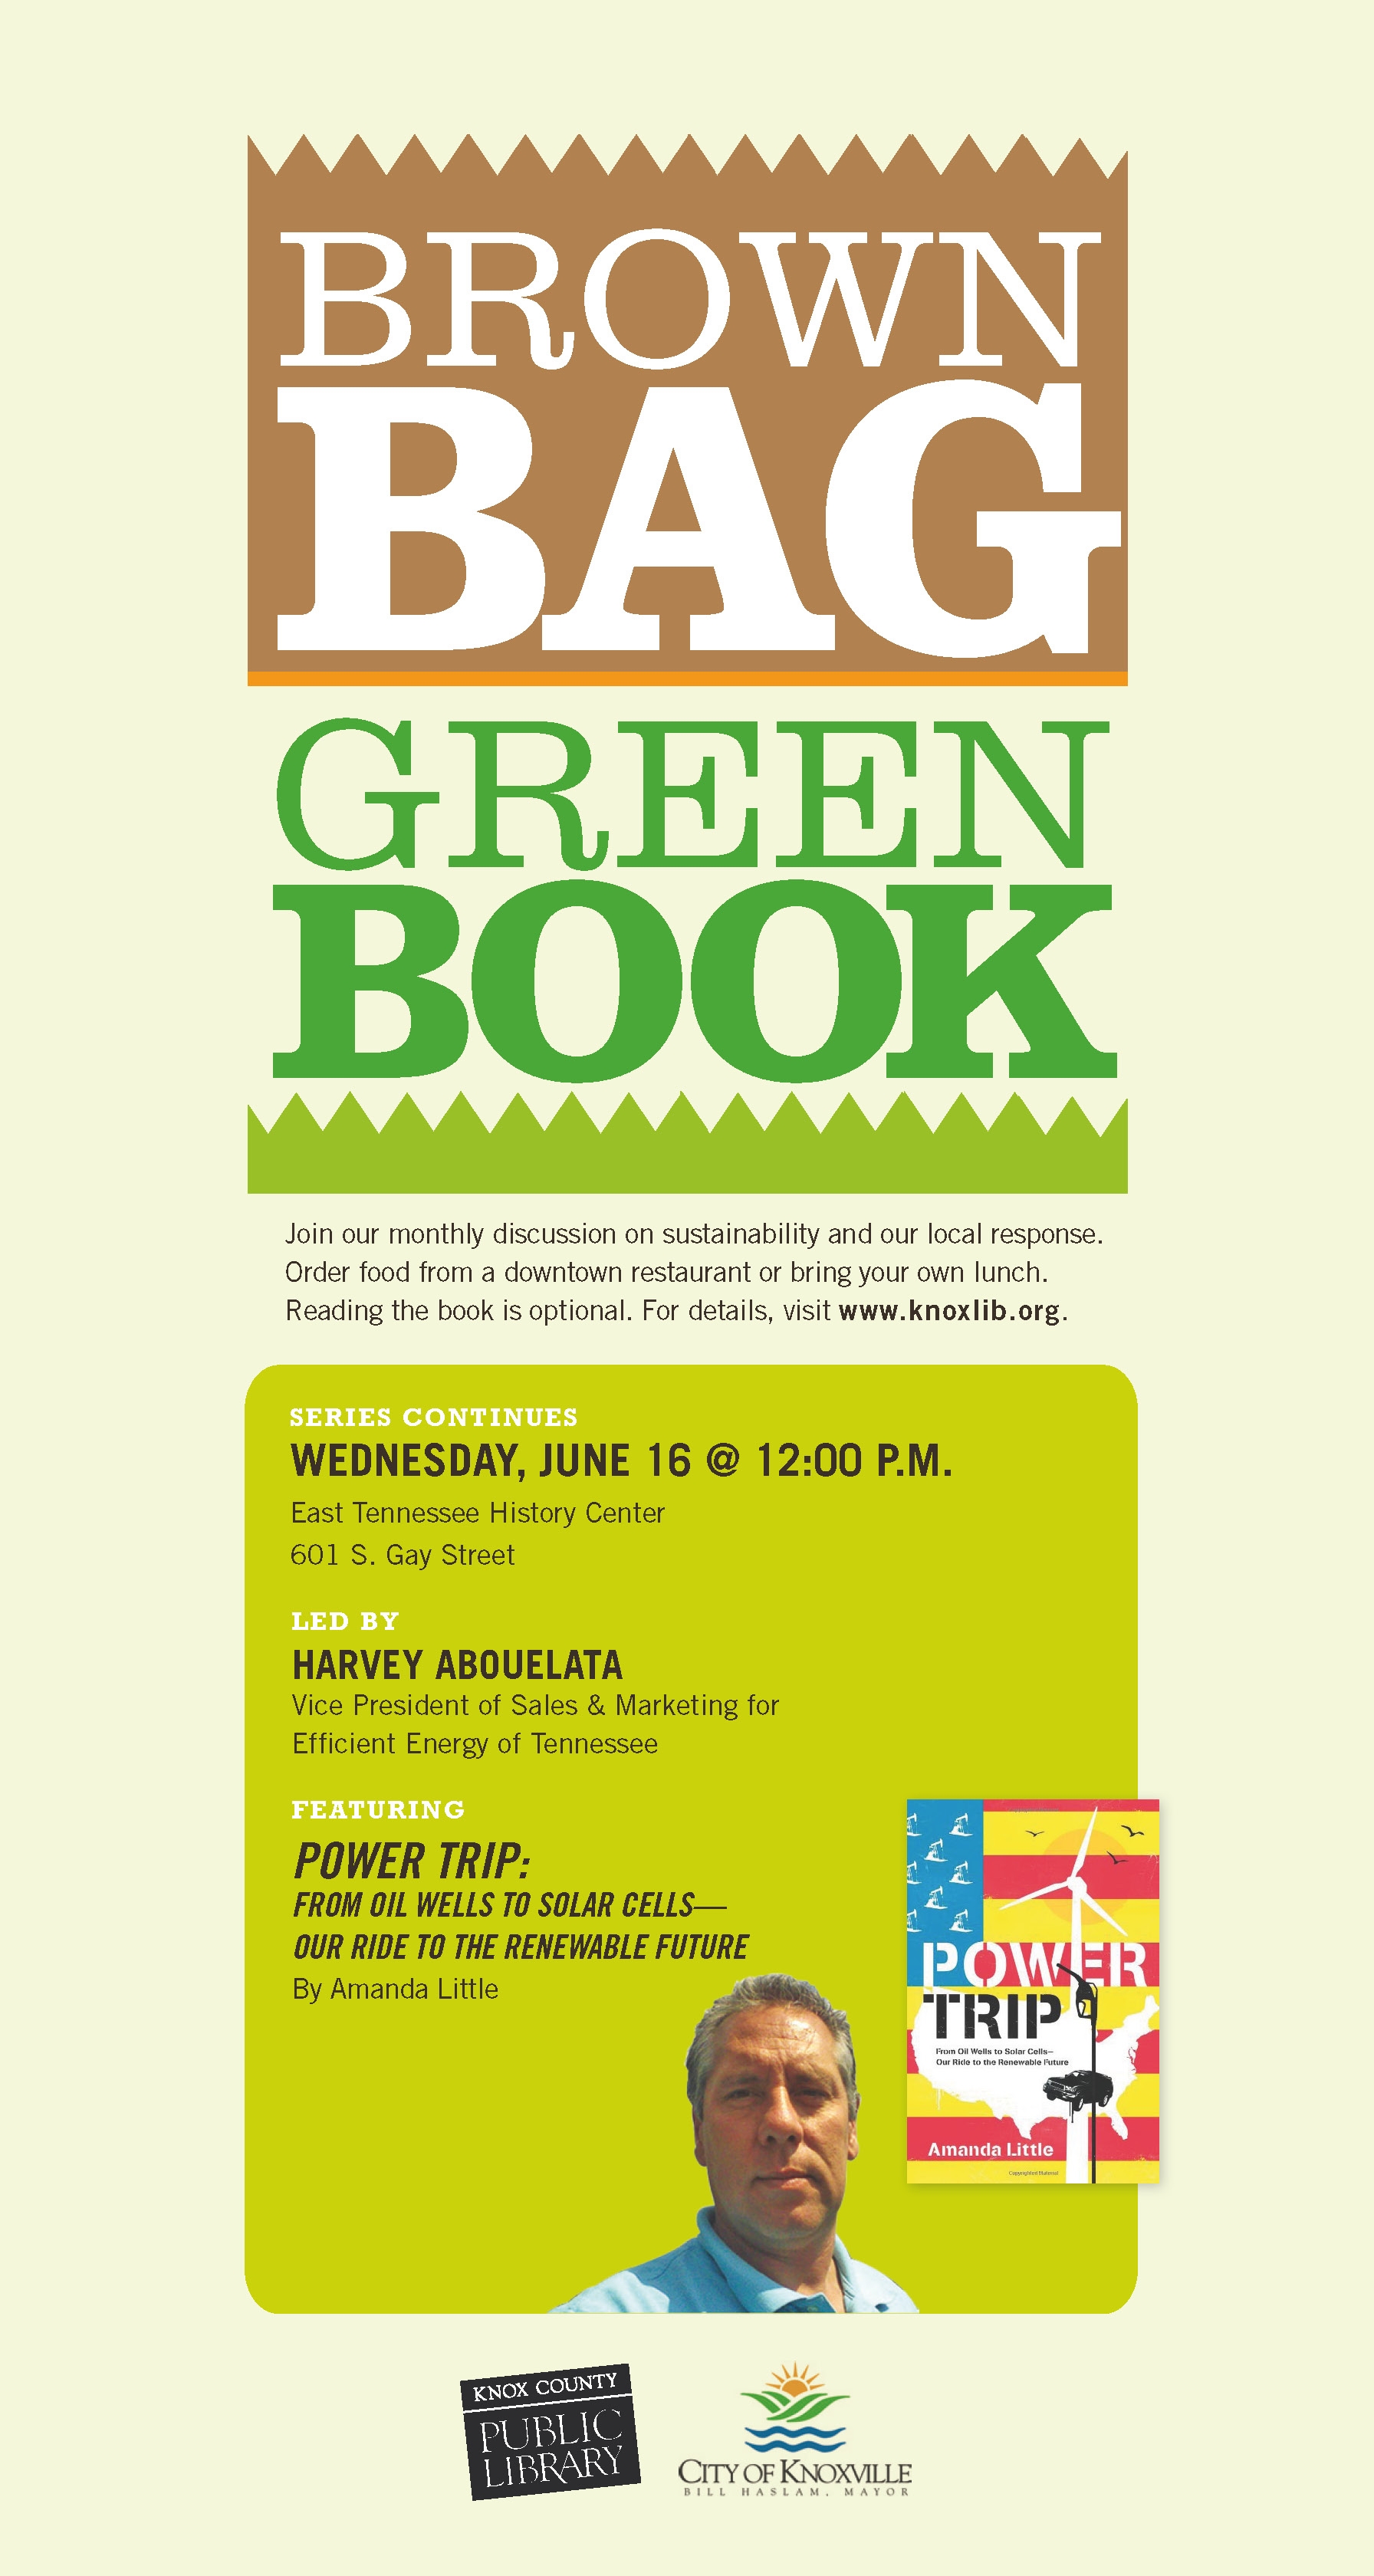 Brown Bag Green Book, "Power Trip" discussion - Poster Image